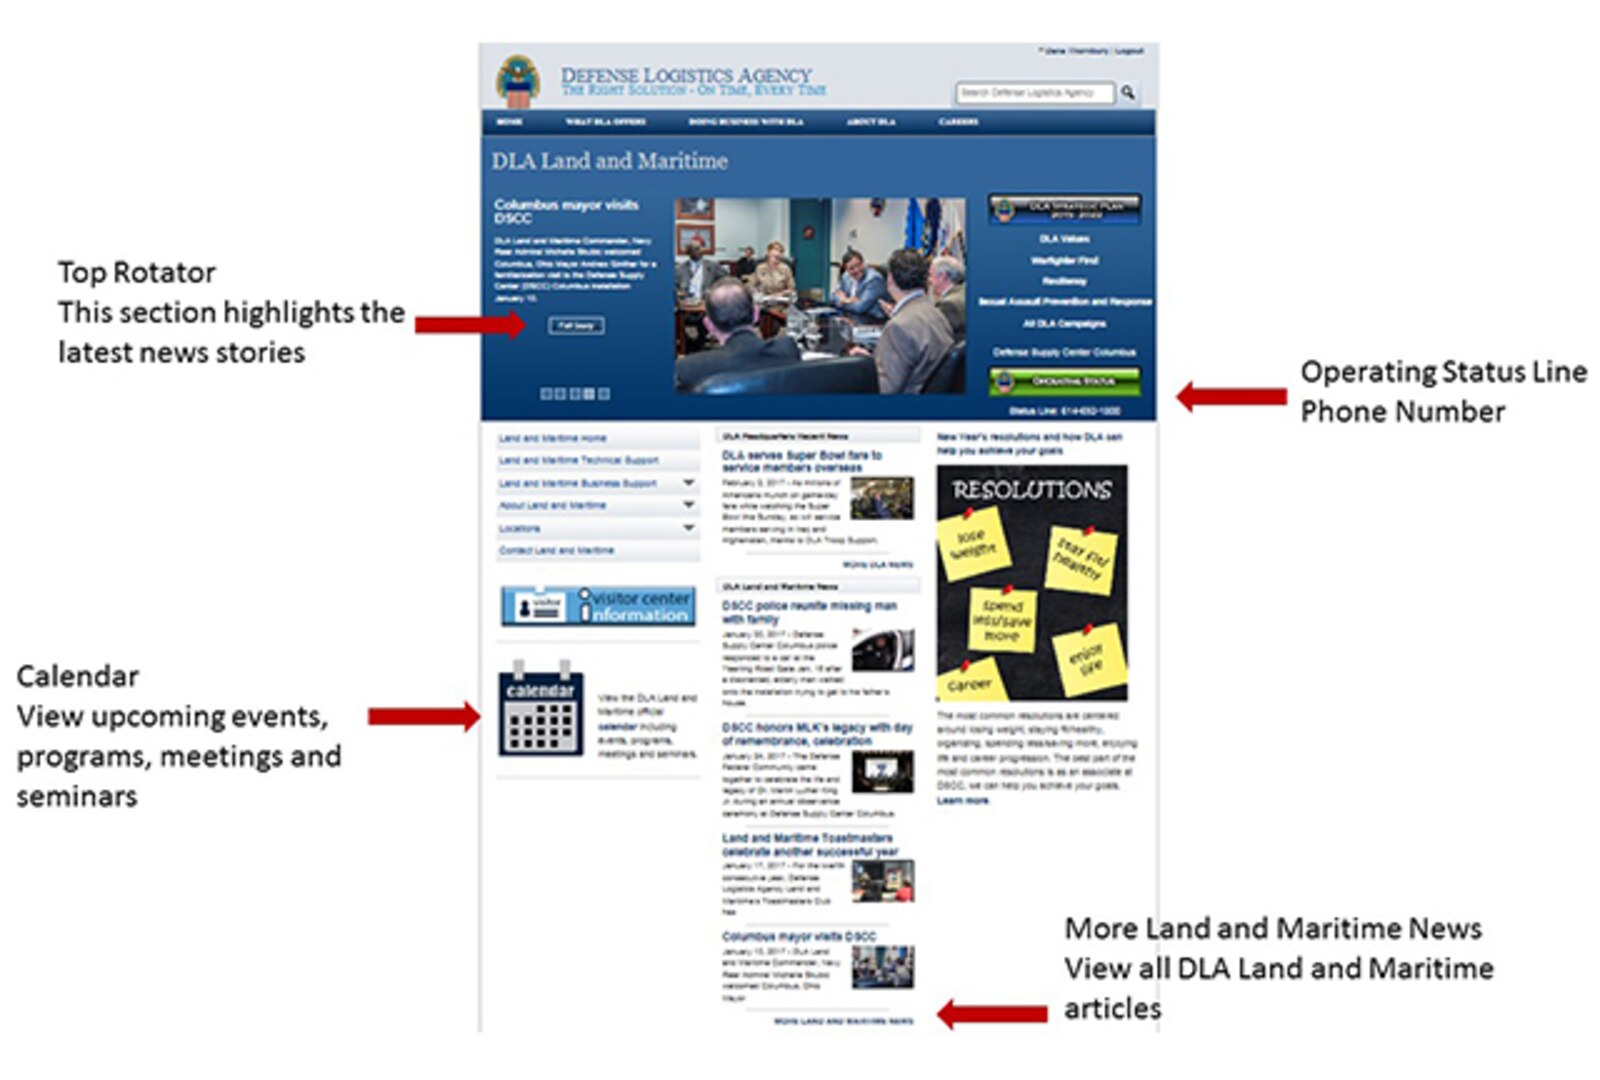 Slides showing key features of the DLA Land and Maritime home page.